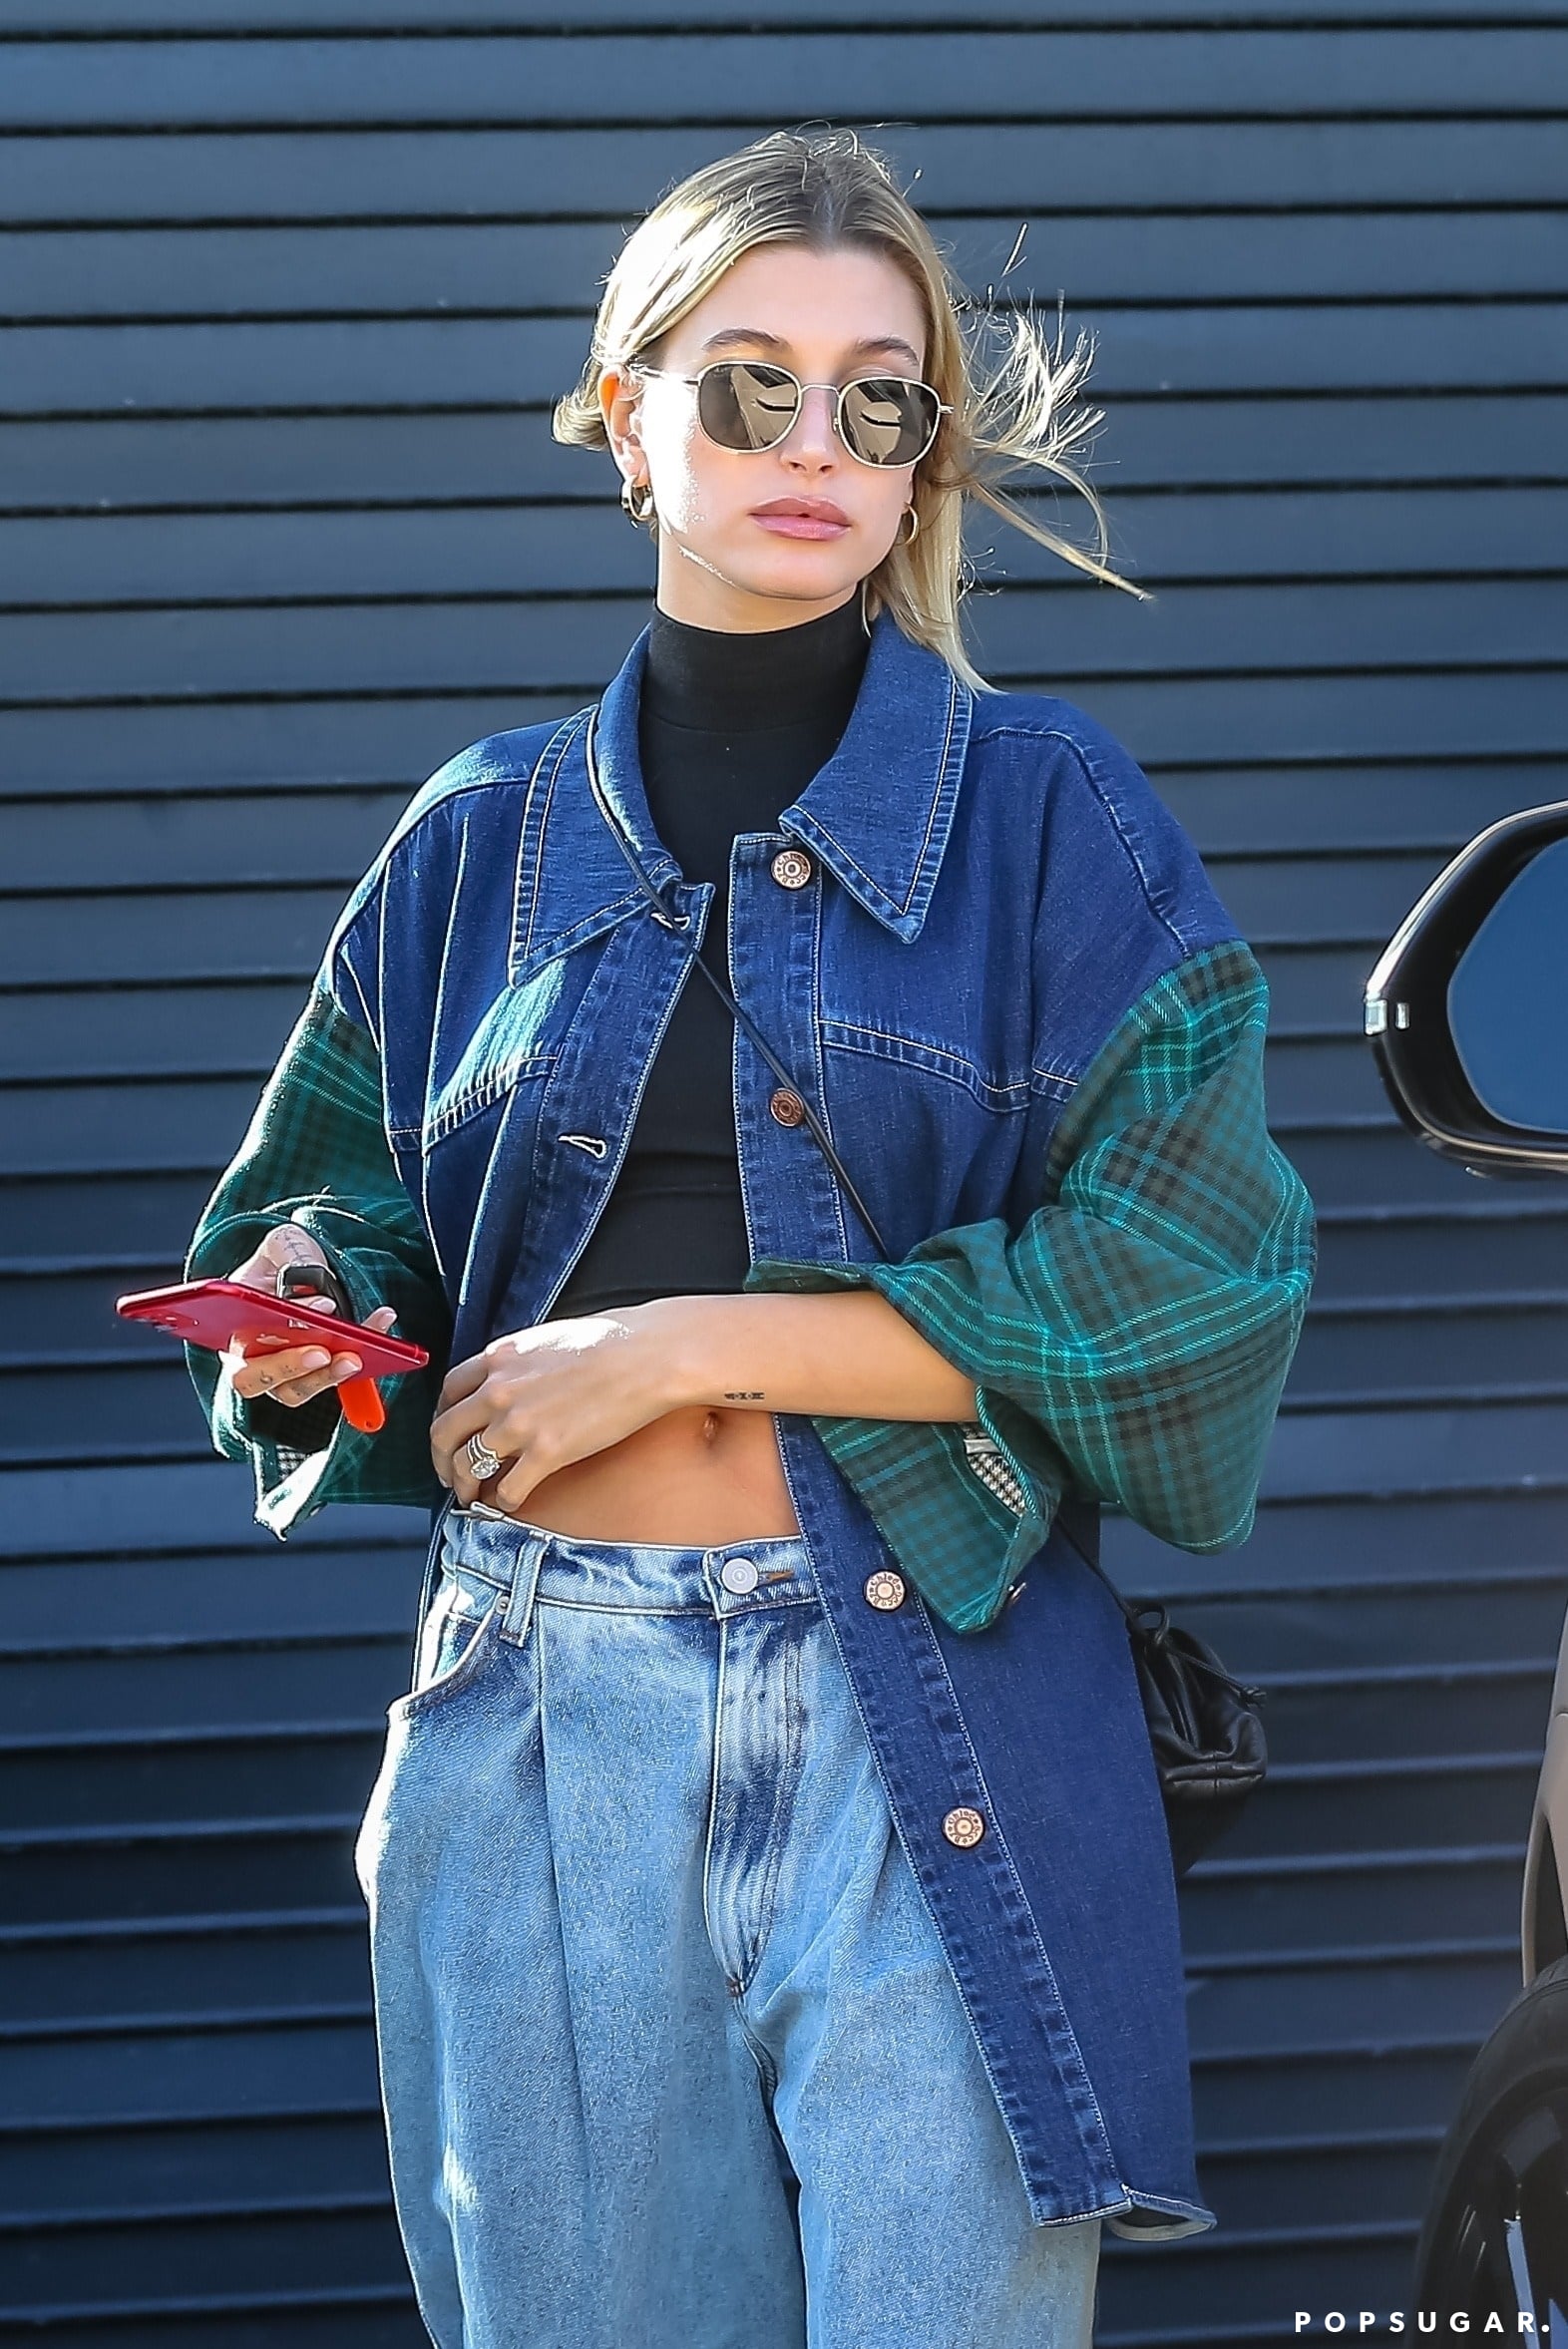 Buy > flannel and jean jacket outfit > in stock